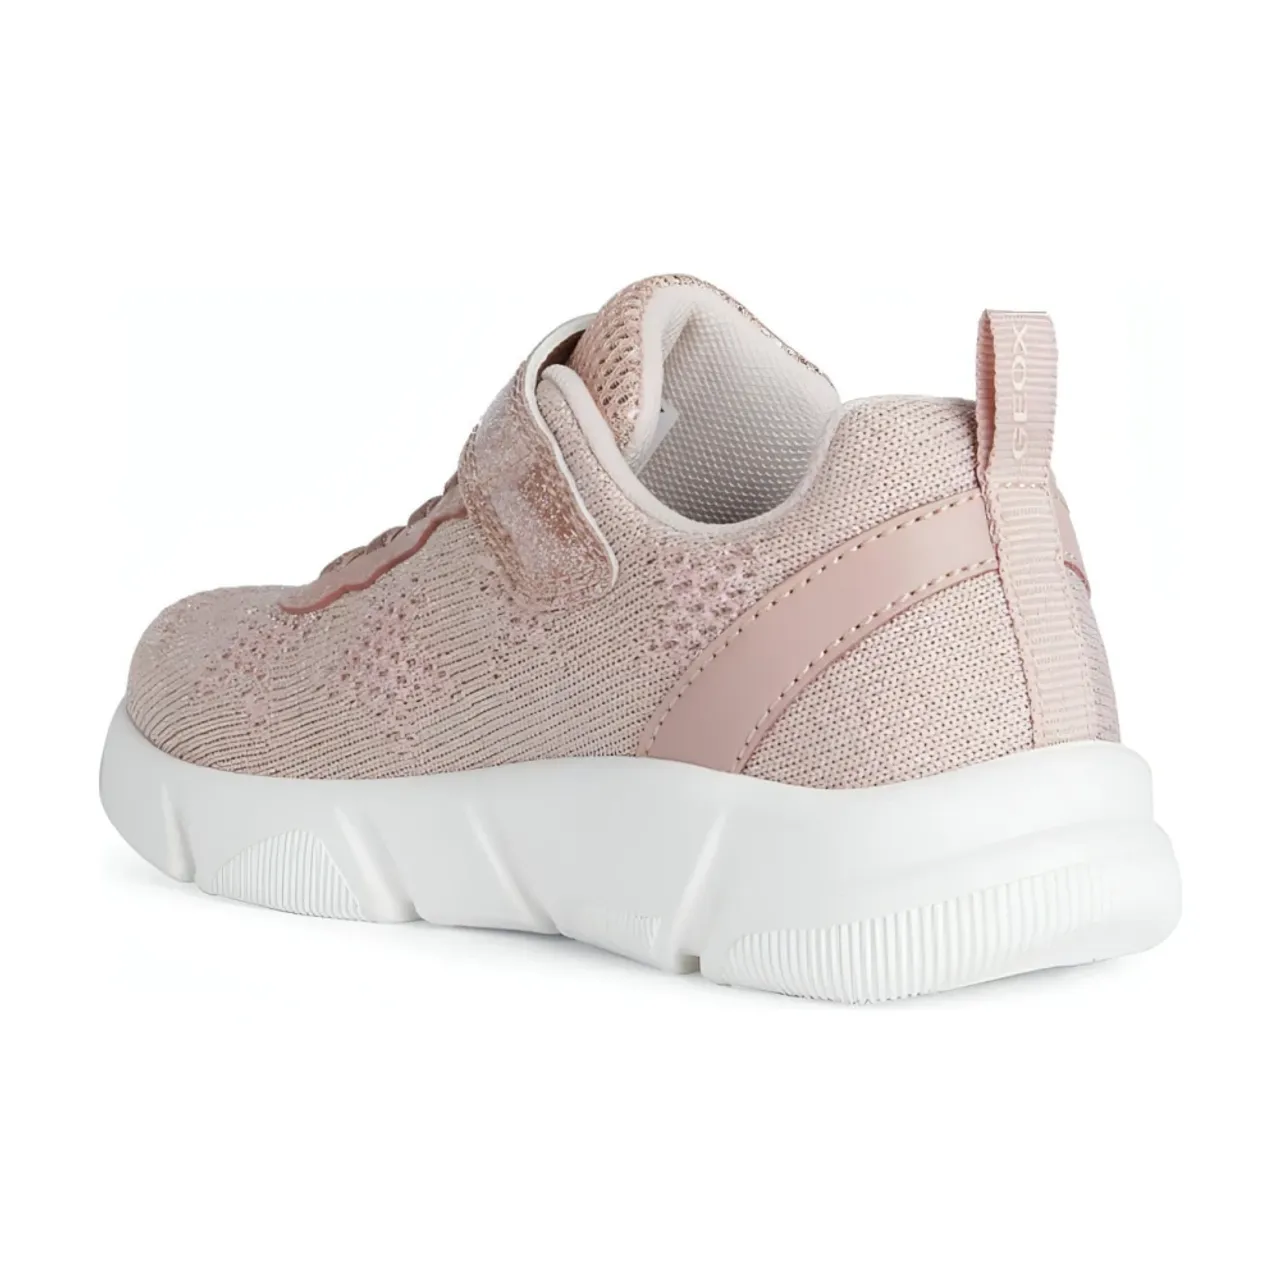 Geox , aril sport shoes ,Pink female, Sizes: